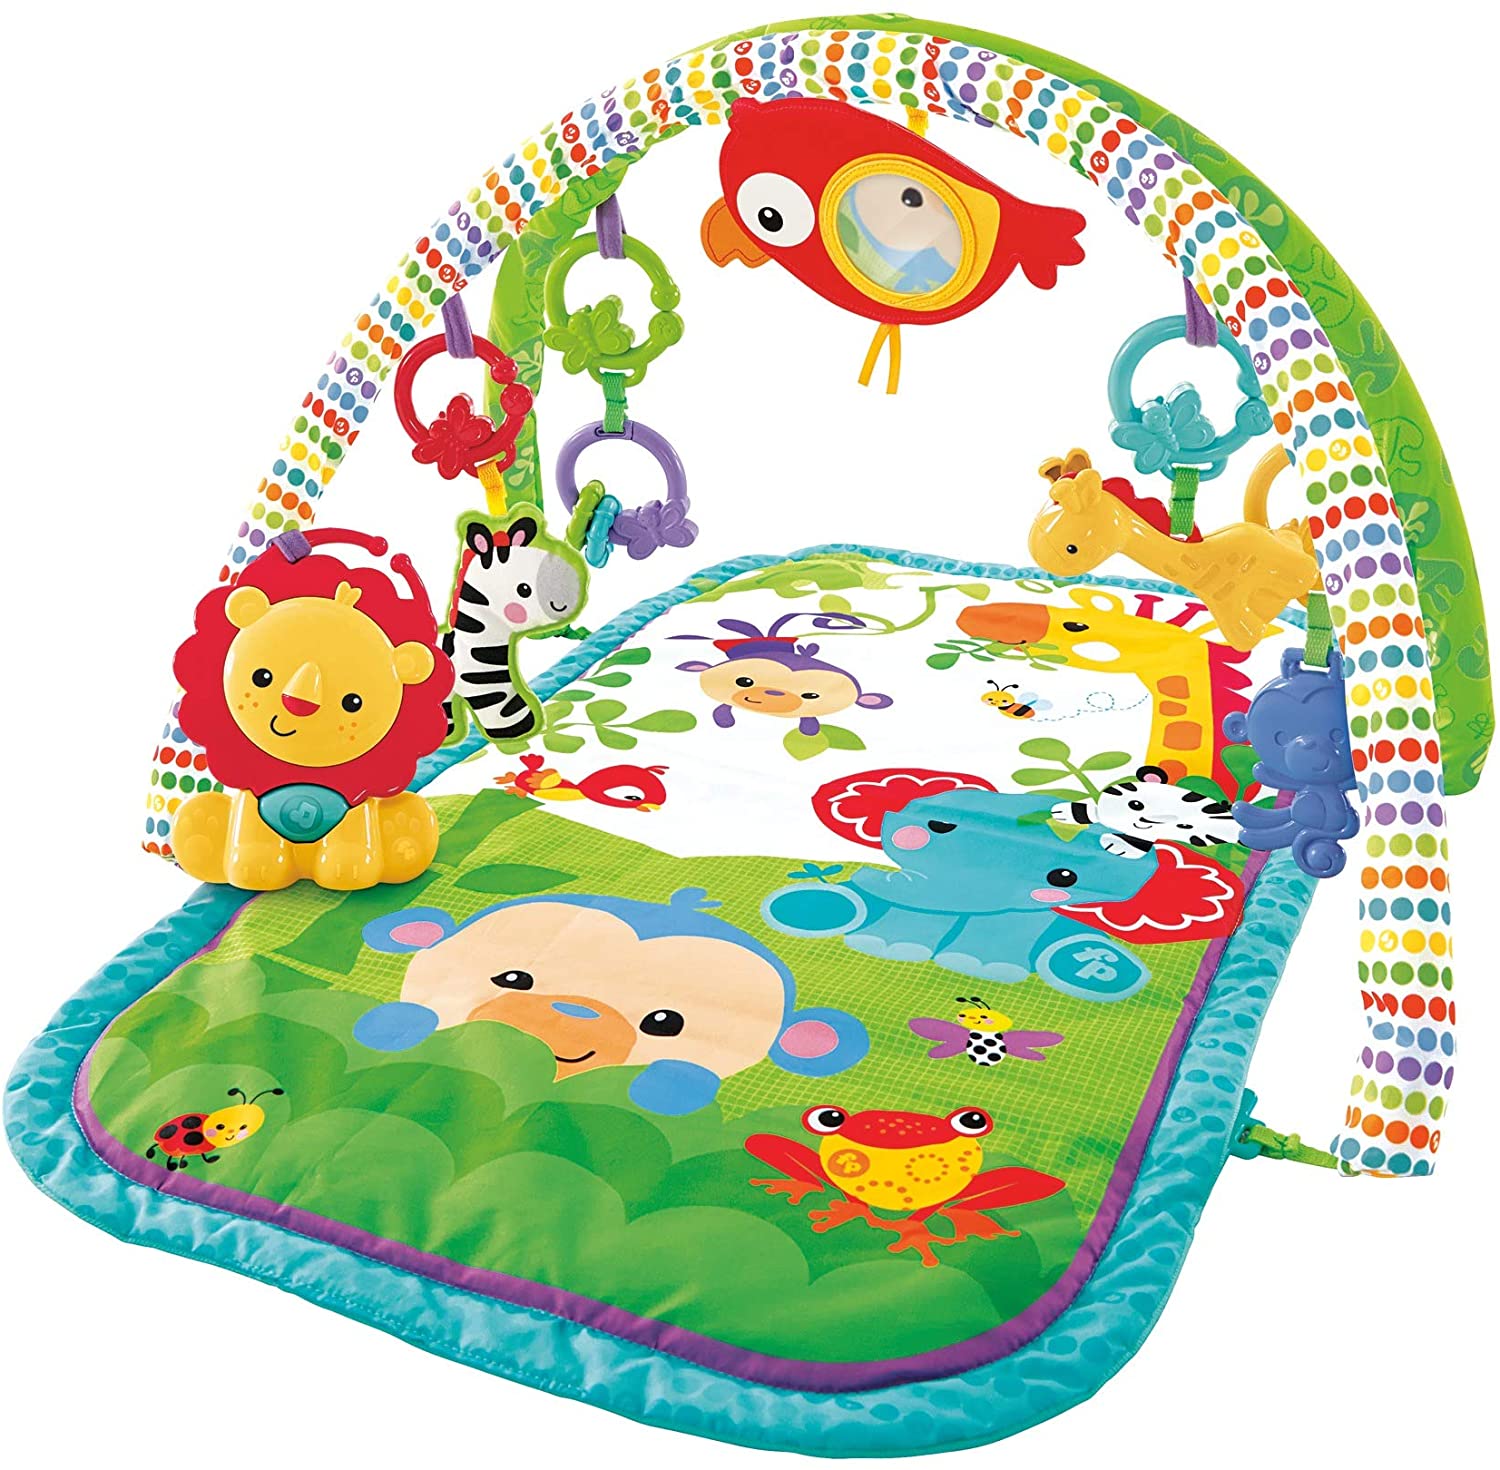 Fisher-Price CHP85 Rainforest Friends 3-in-1 Portable Baby’s Play Mat with Removable Toys - Suitable from Birth